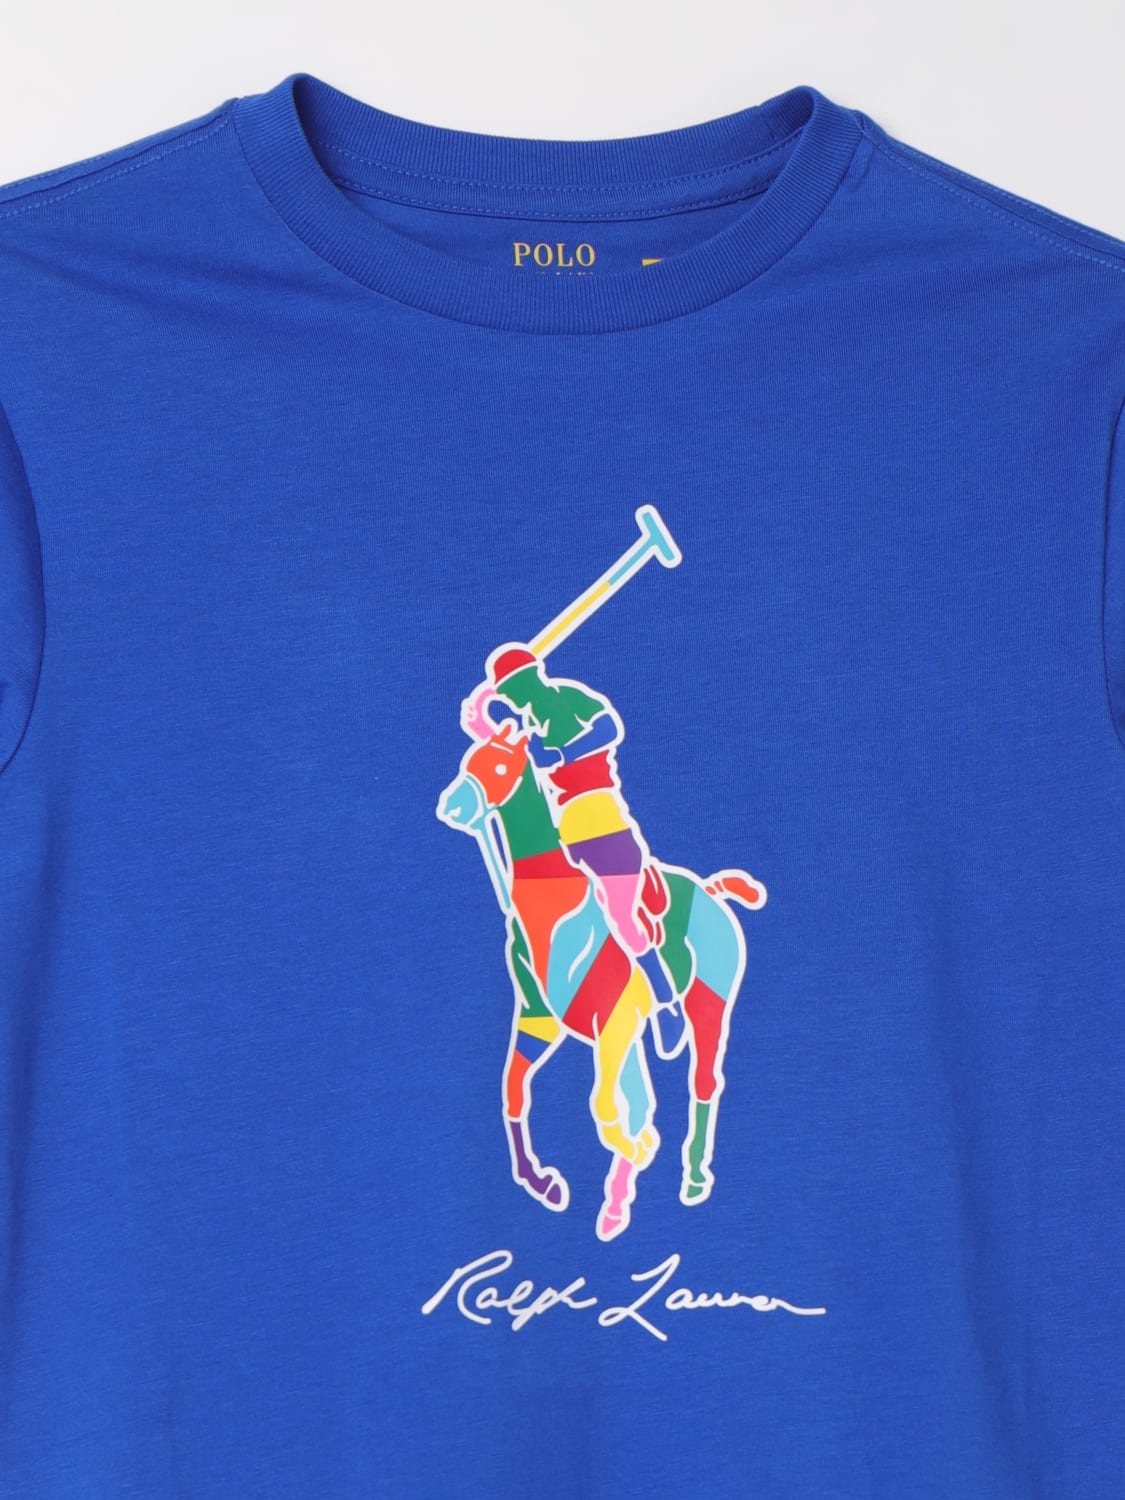 NEW Polo Ralph Lauren Womens Polo Shirt! Big Pony & Crest Number